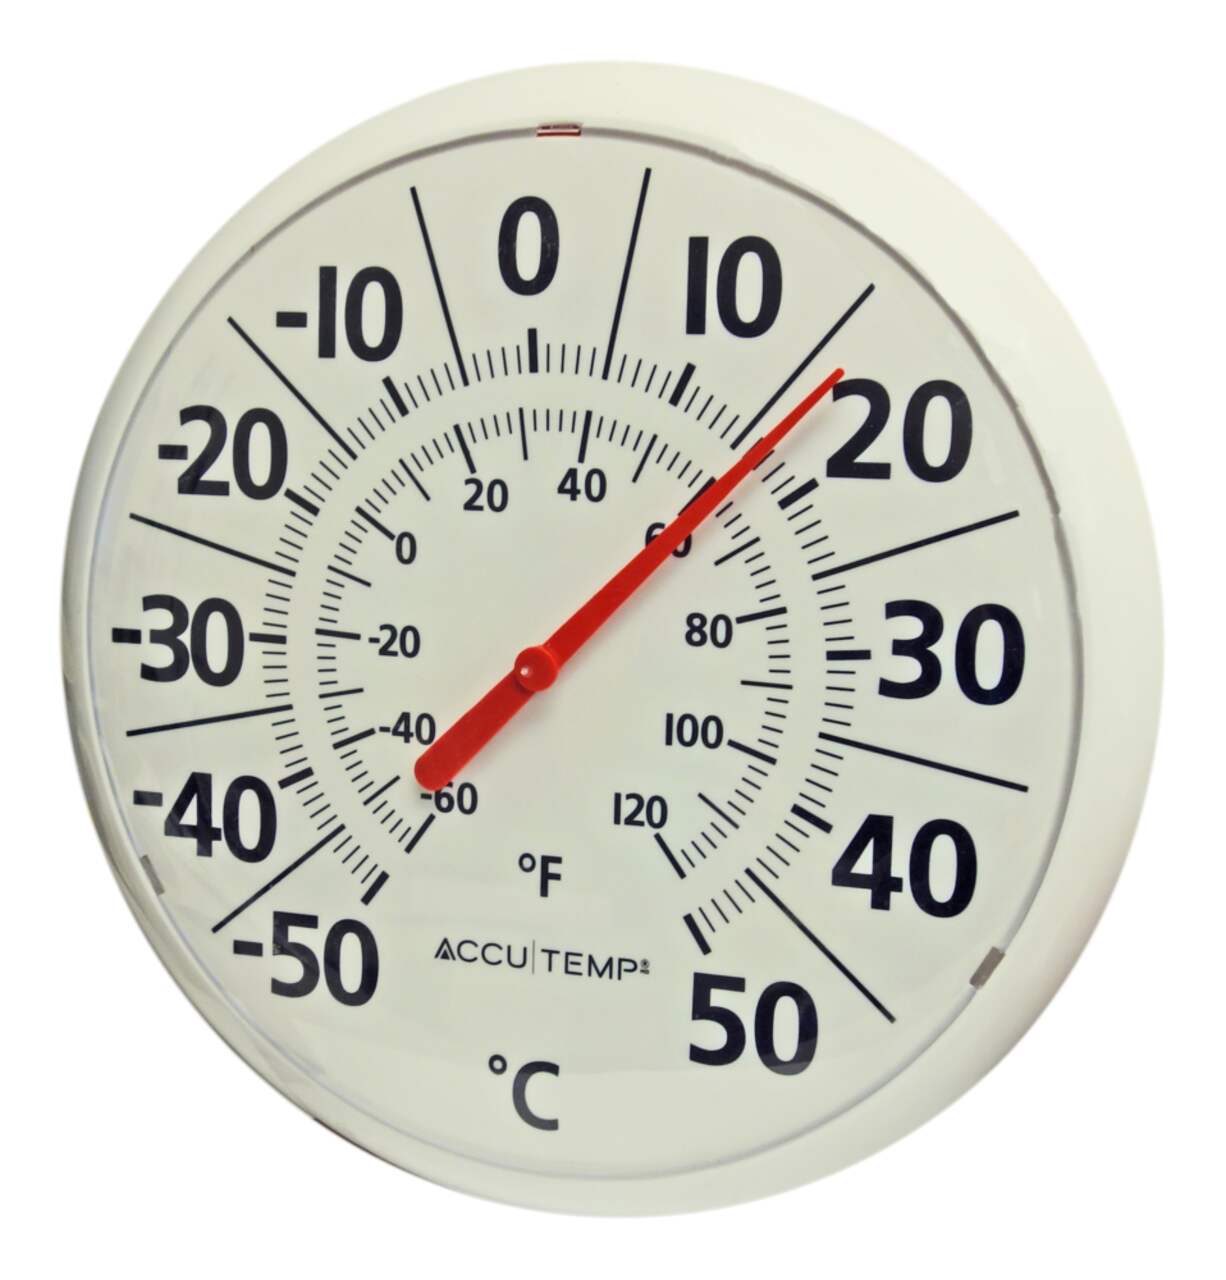 https://media-www.canadiantire.ca/product/living/kitchen/kitchen-tools-thermometers/0429116/13-in-round-outdoor-thermometer-white-d98390ba-a7a9-45bb-8248-792c3fc68a79.png?imdensity=1&imwidth=640&impolicy=mZoom